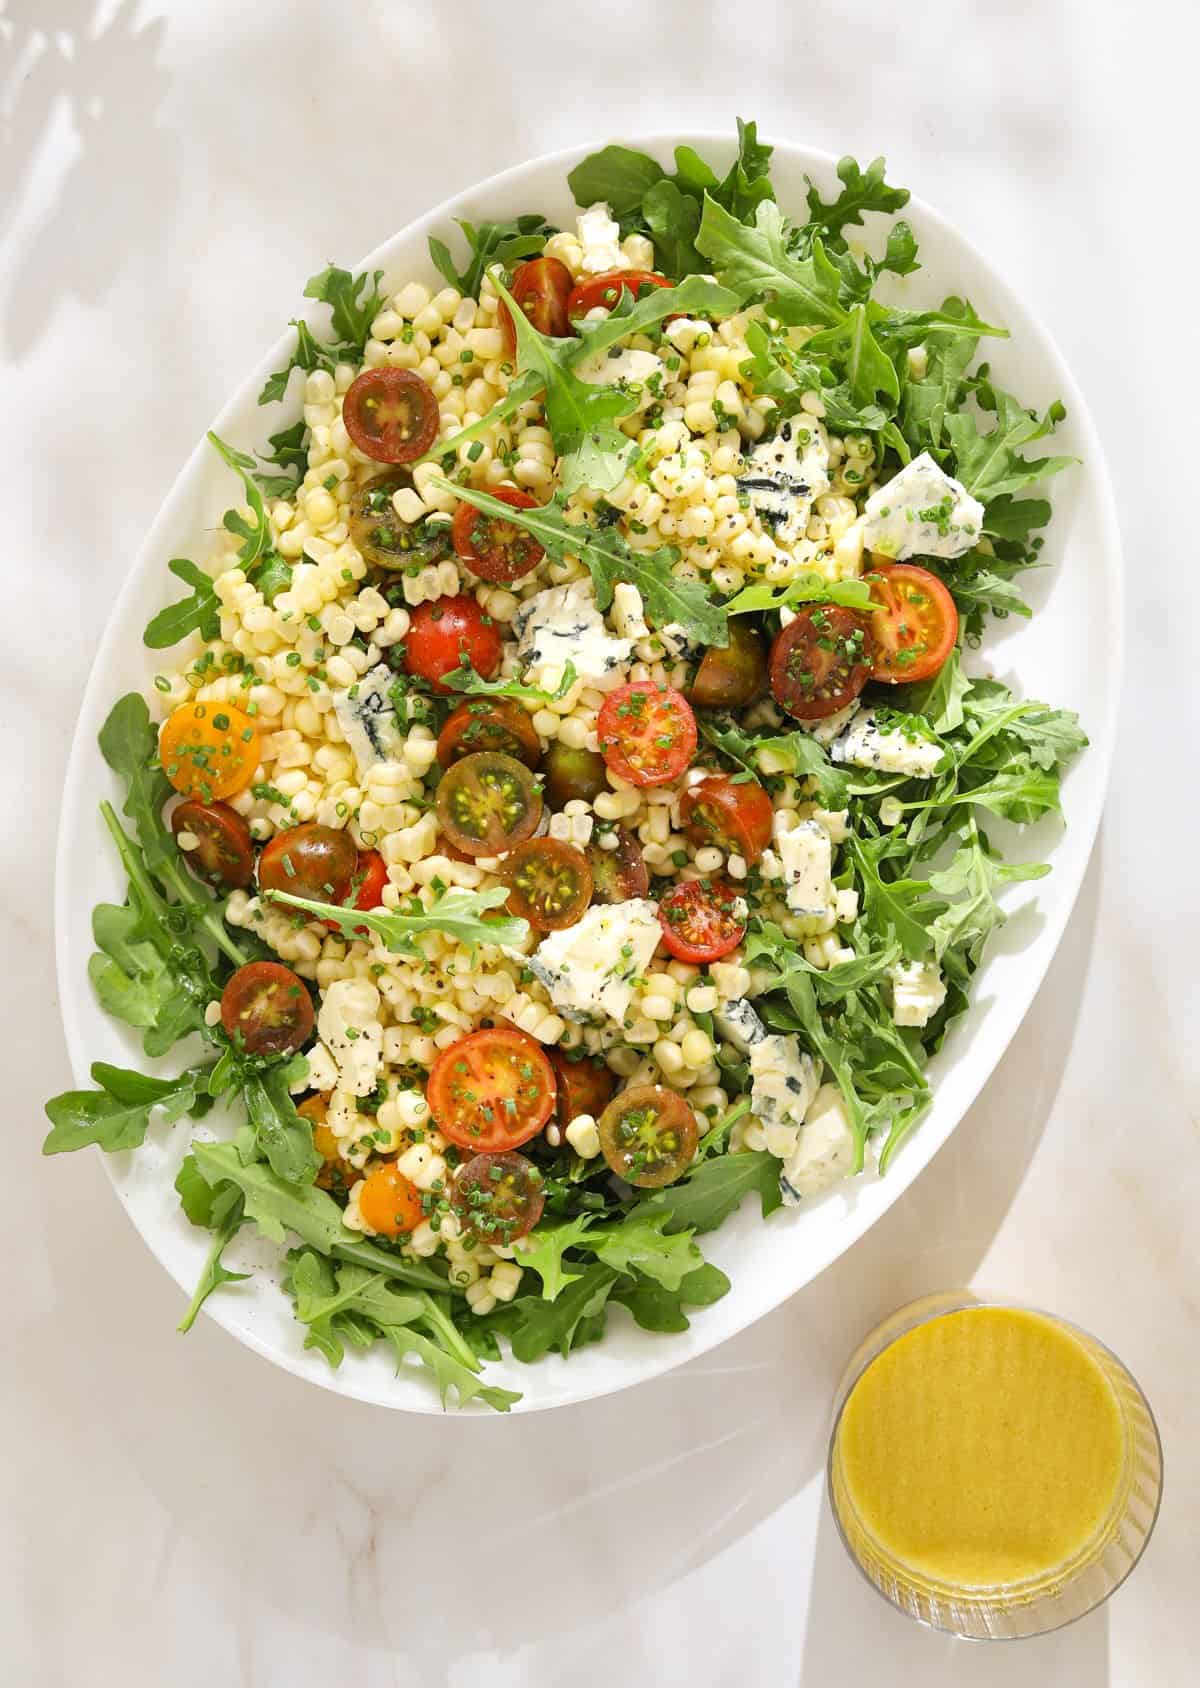 Corn and Arugula Salad with Tomatoes and Blue Cheese